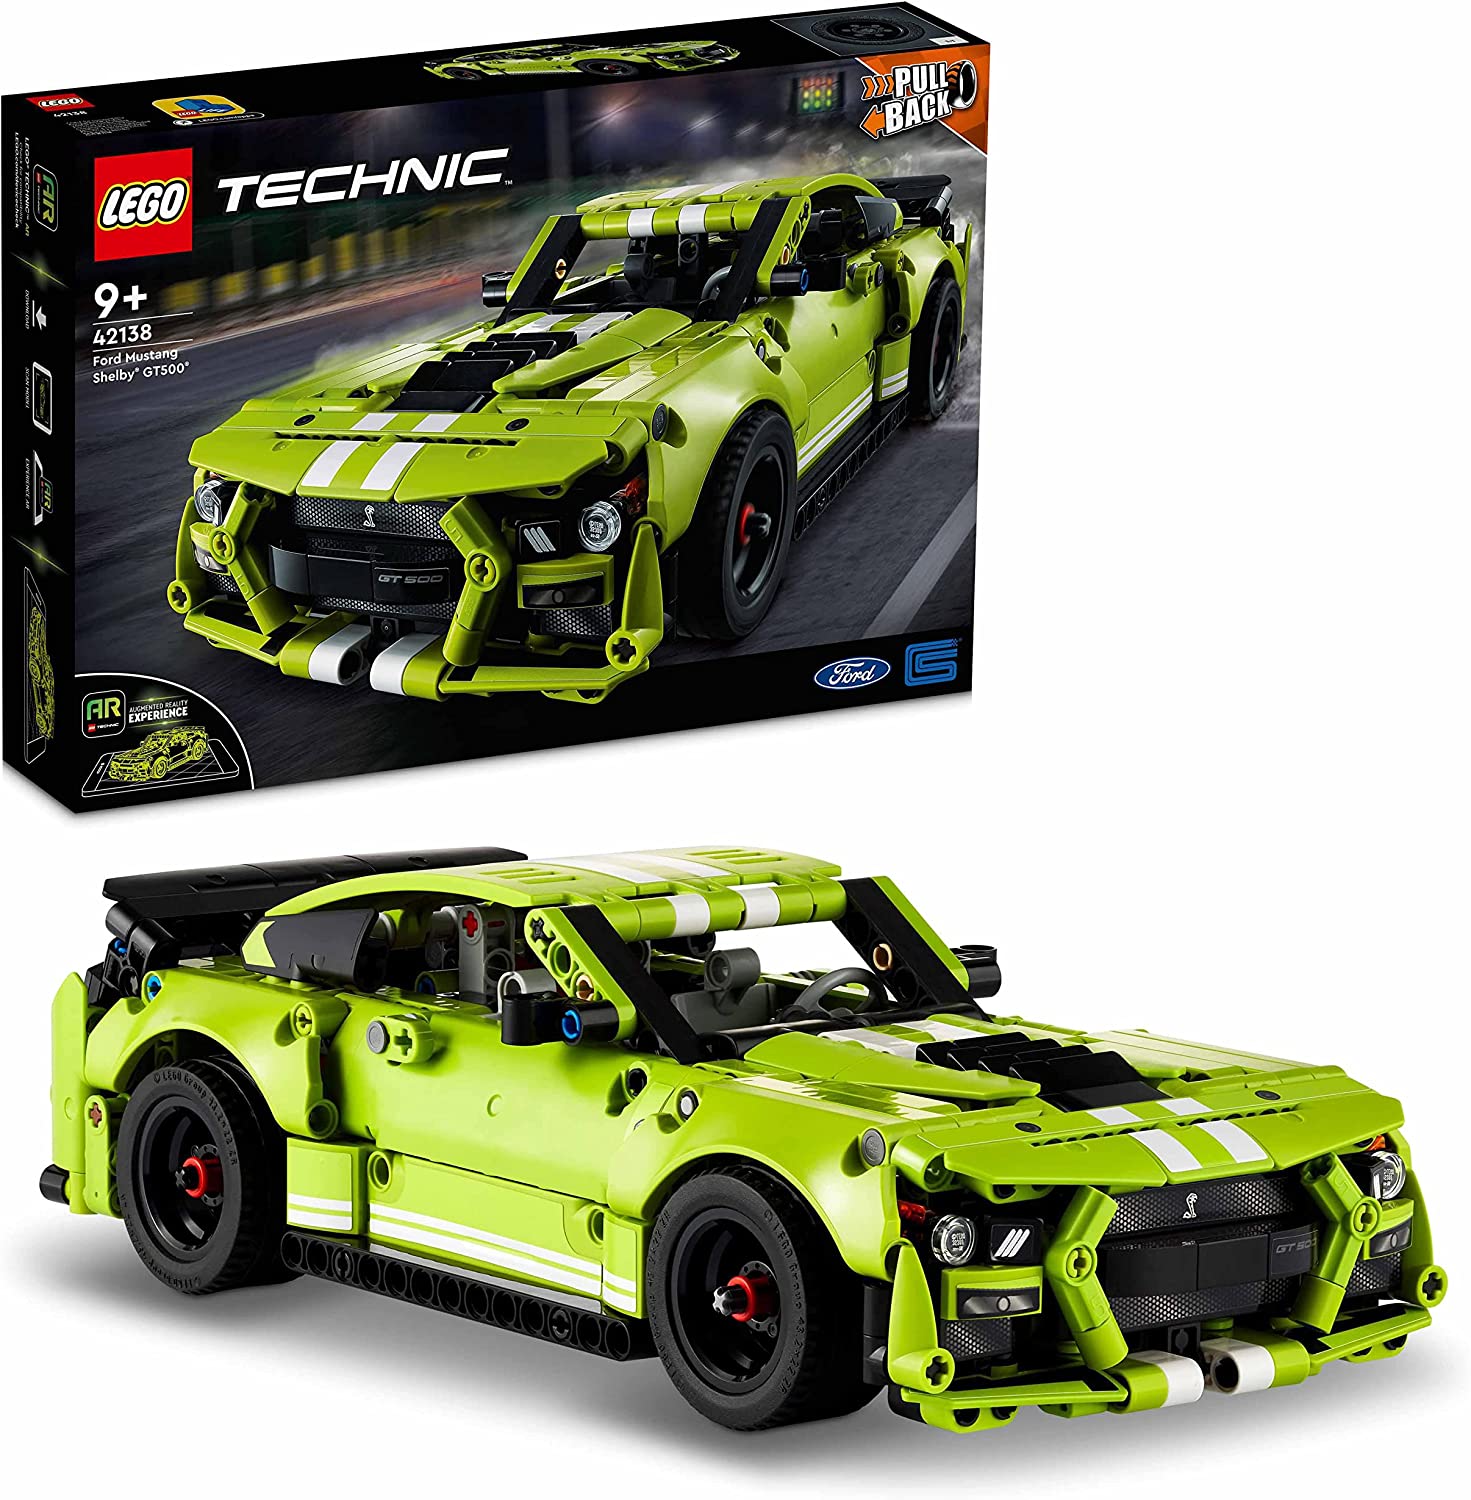 LEGO TECHNIC - 42138 - Ford Mustang Shelby GT500